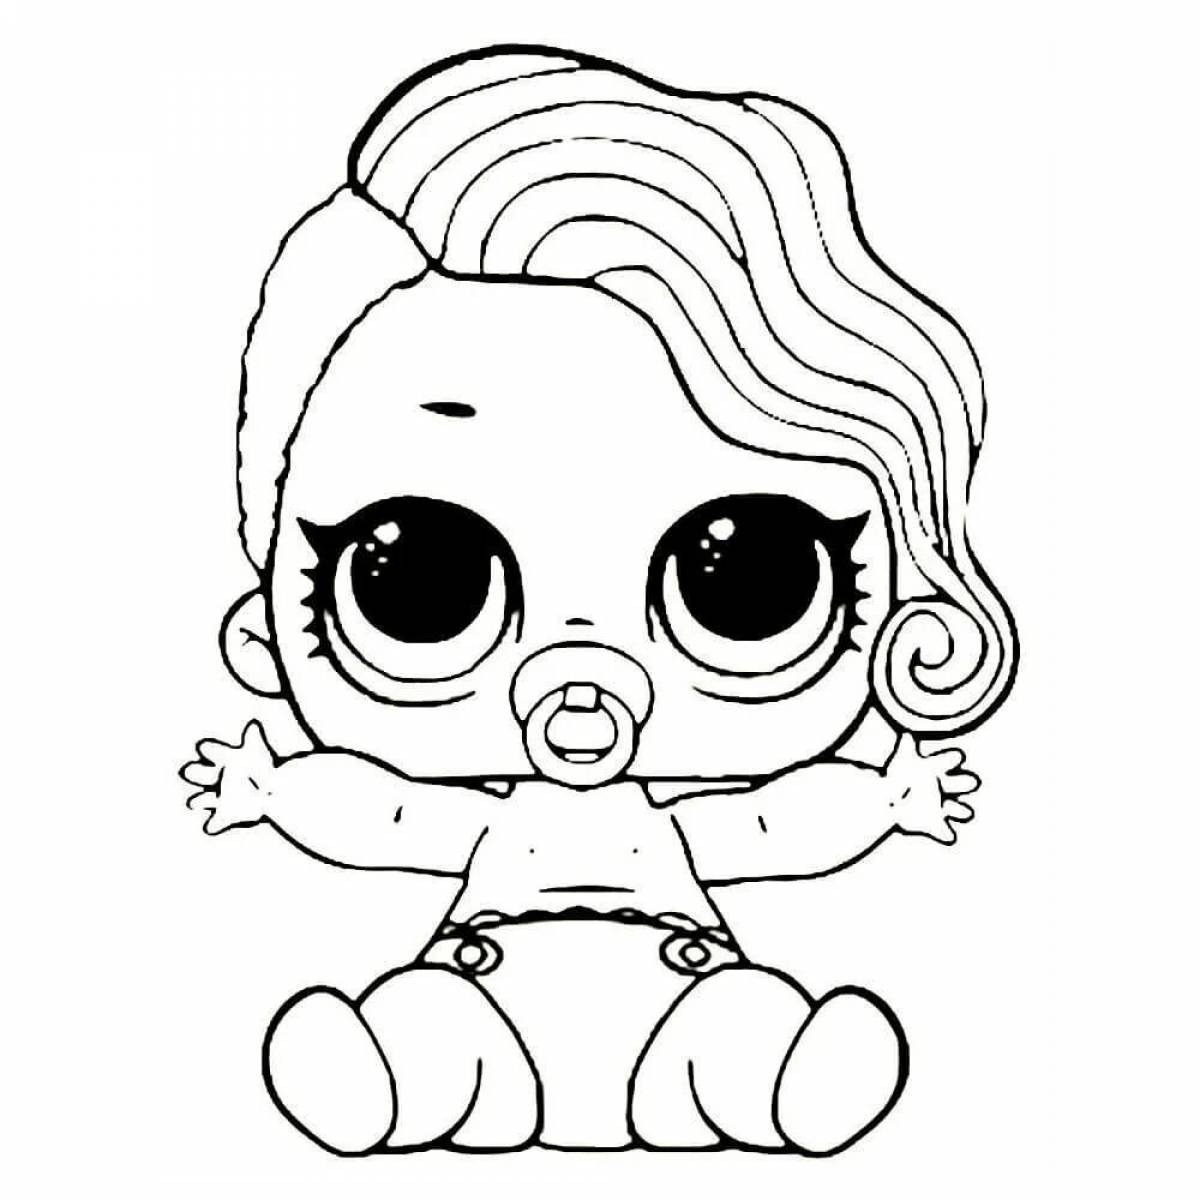 Great coloring book for lol dolls